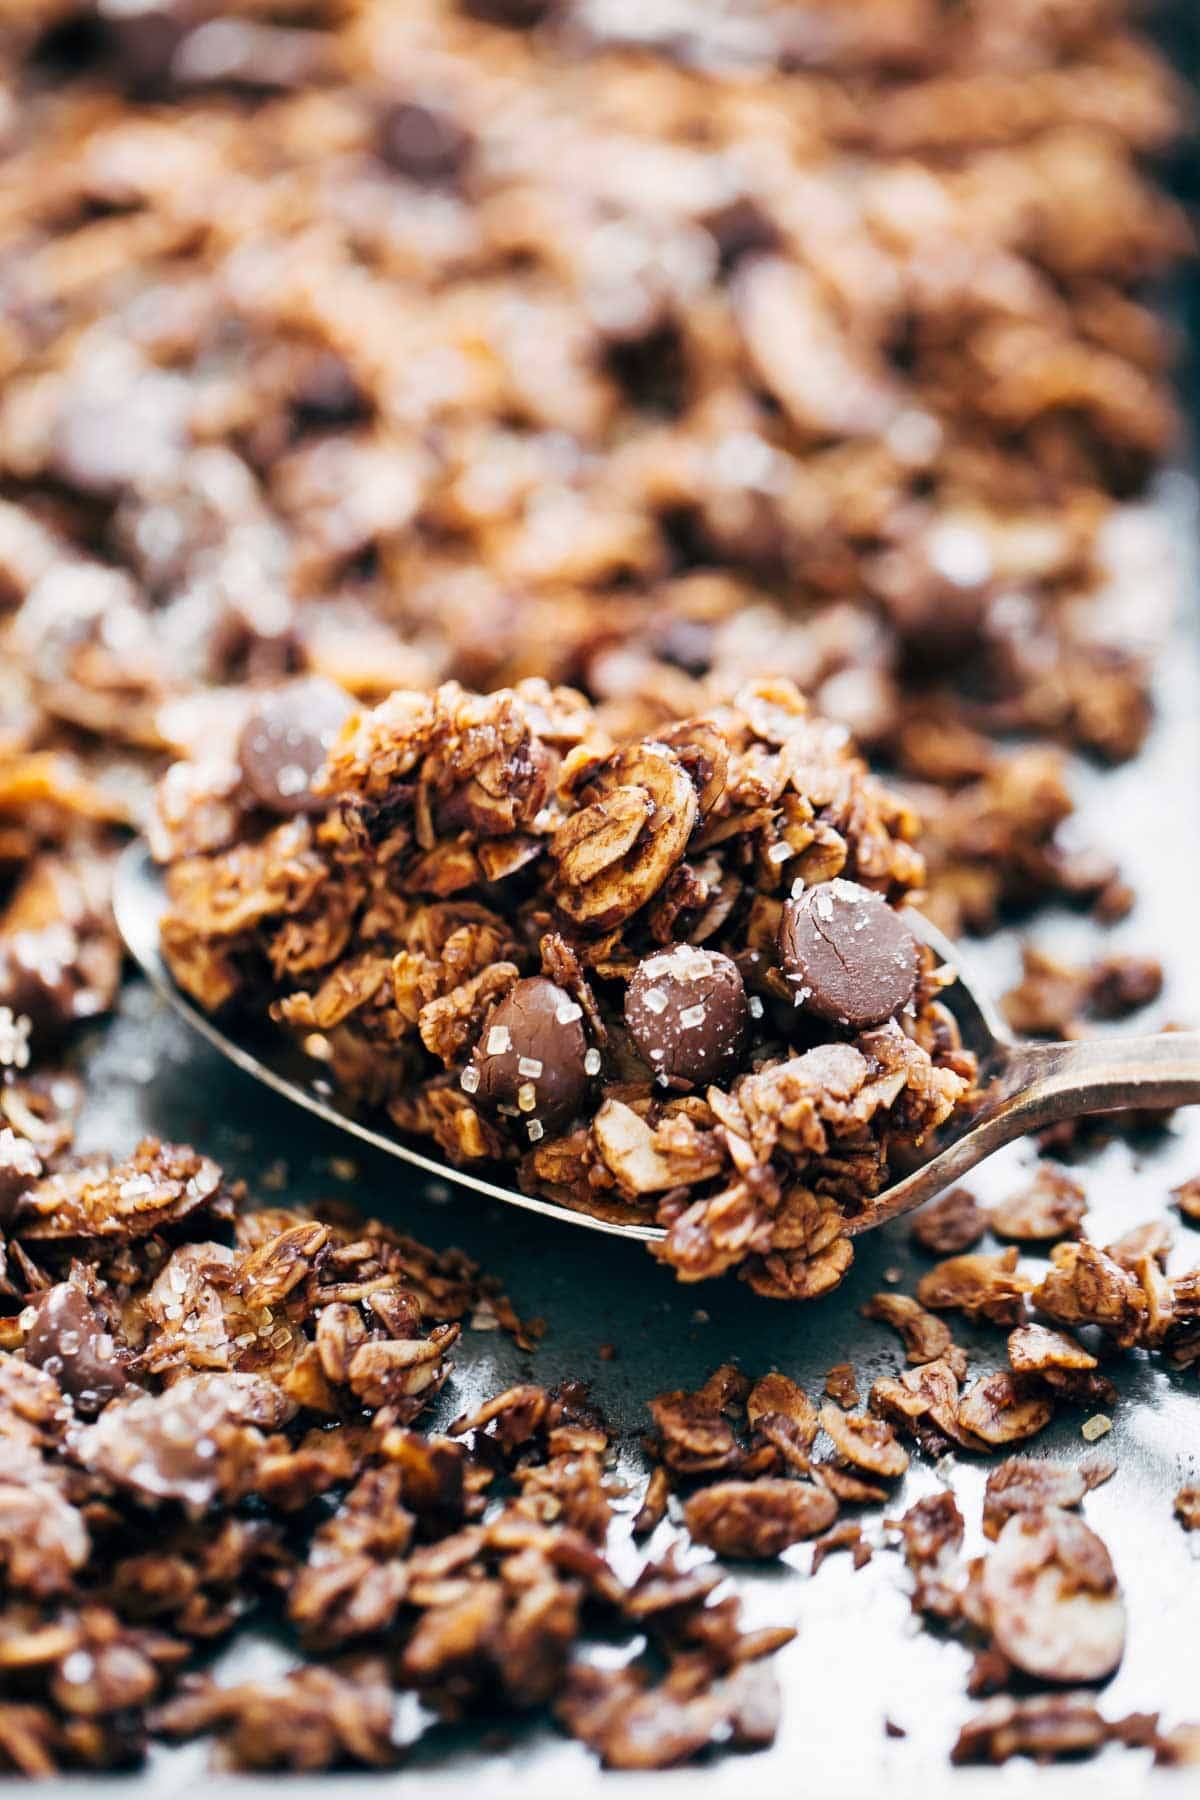 Chocolate Granola with almonds, oats, coconut flakes, chocolate chips, topped with crunchy sugar and sea sat on a spoon.